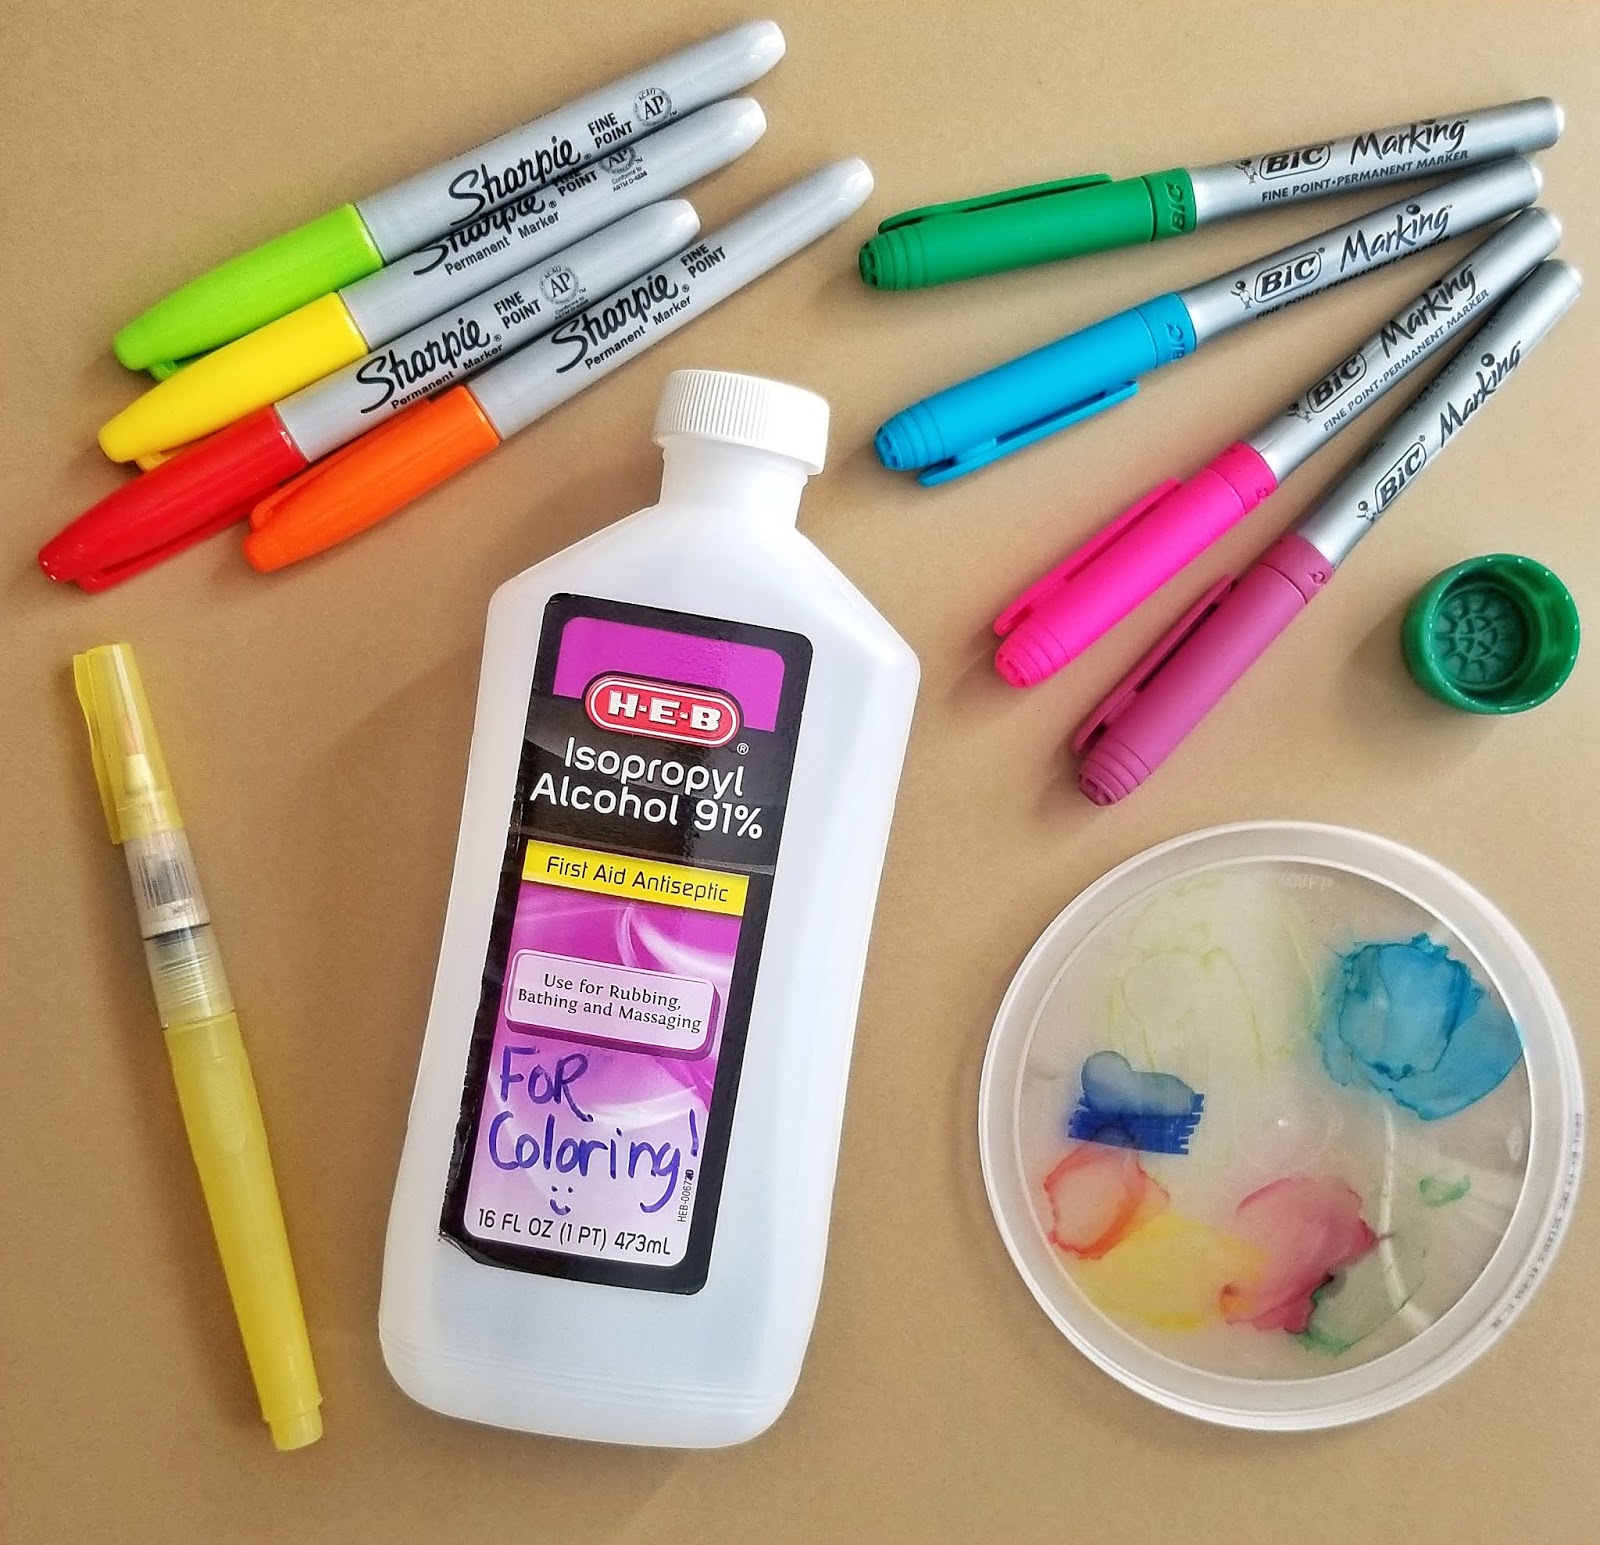 How to Paint with Sharpies and Alcohol